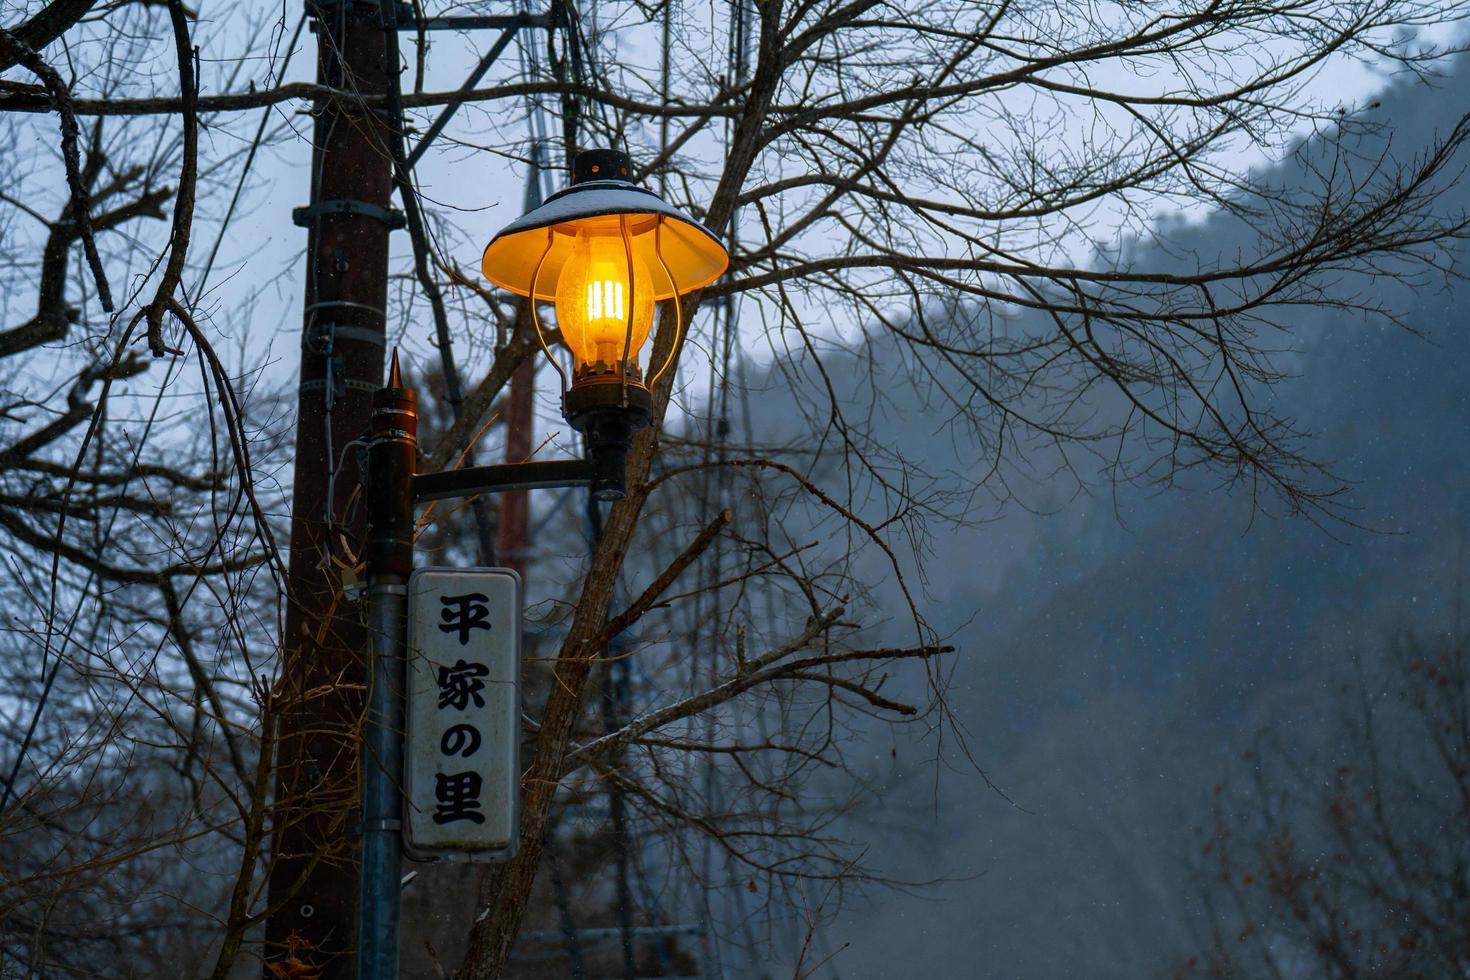 Nikko, JAPAN - 26 JANUARY 2023. tungsten lamp and a Japanese village sign, heavy snow Covered Road at Heike No Sato Village in Tochigi Prefecture, Nikko City, photo